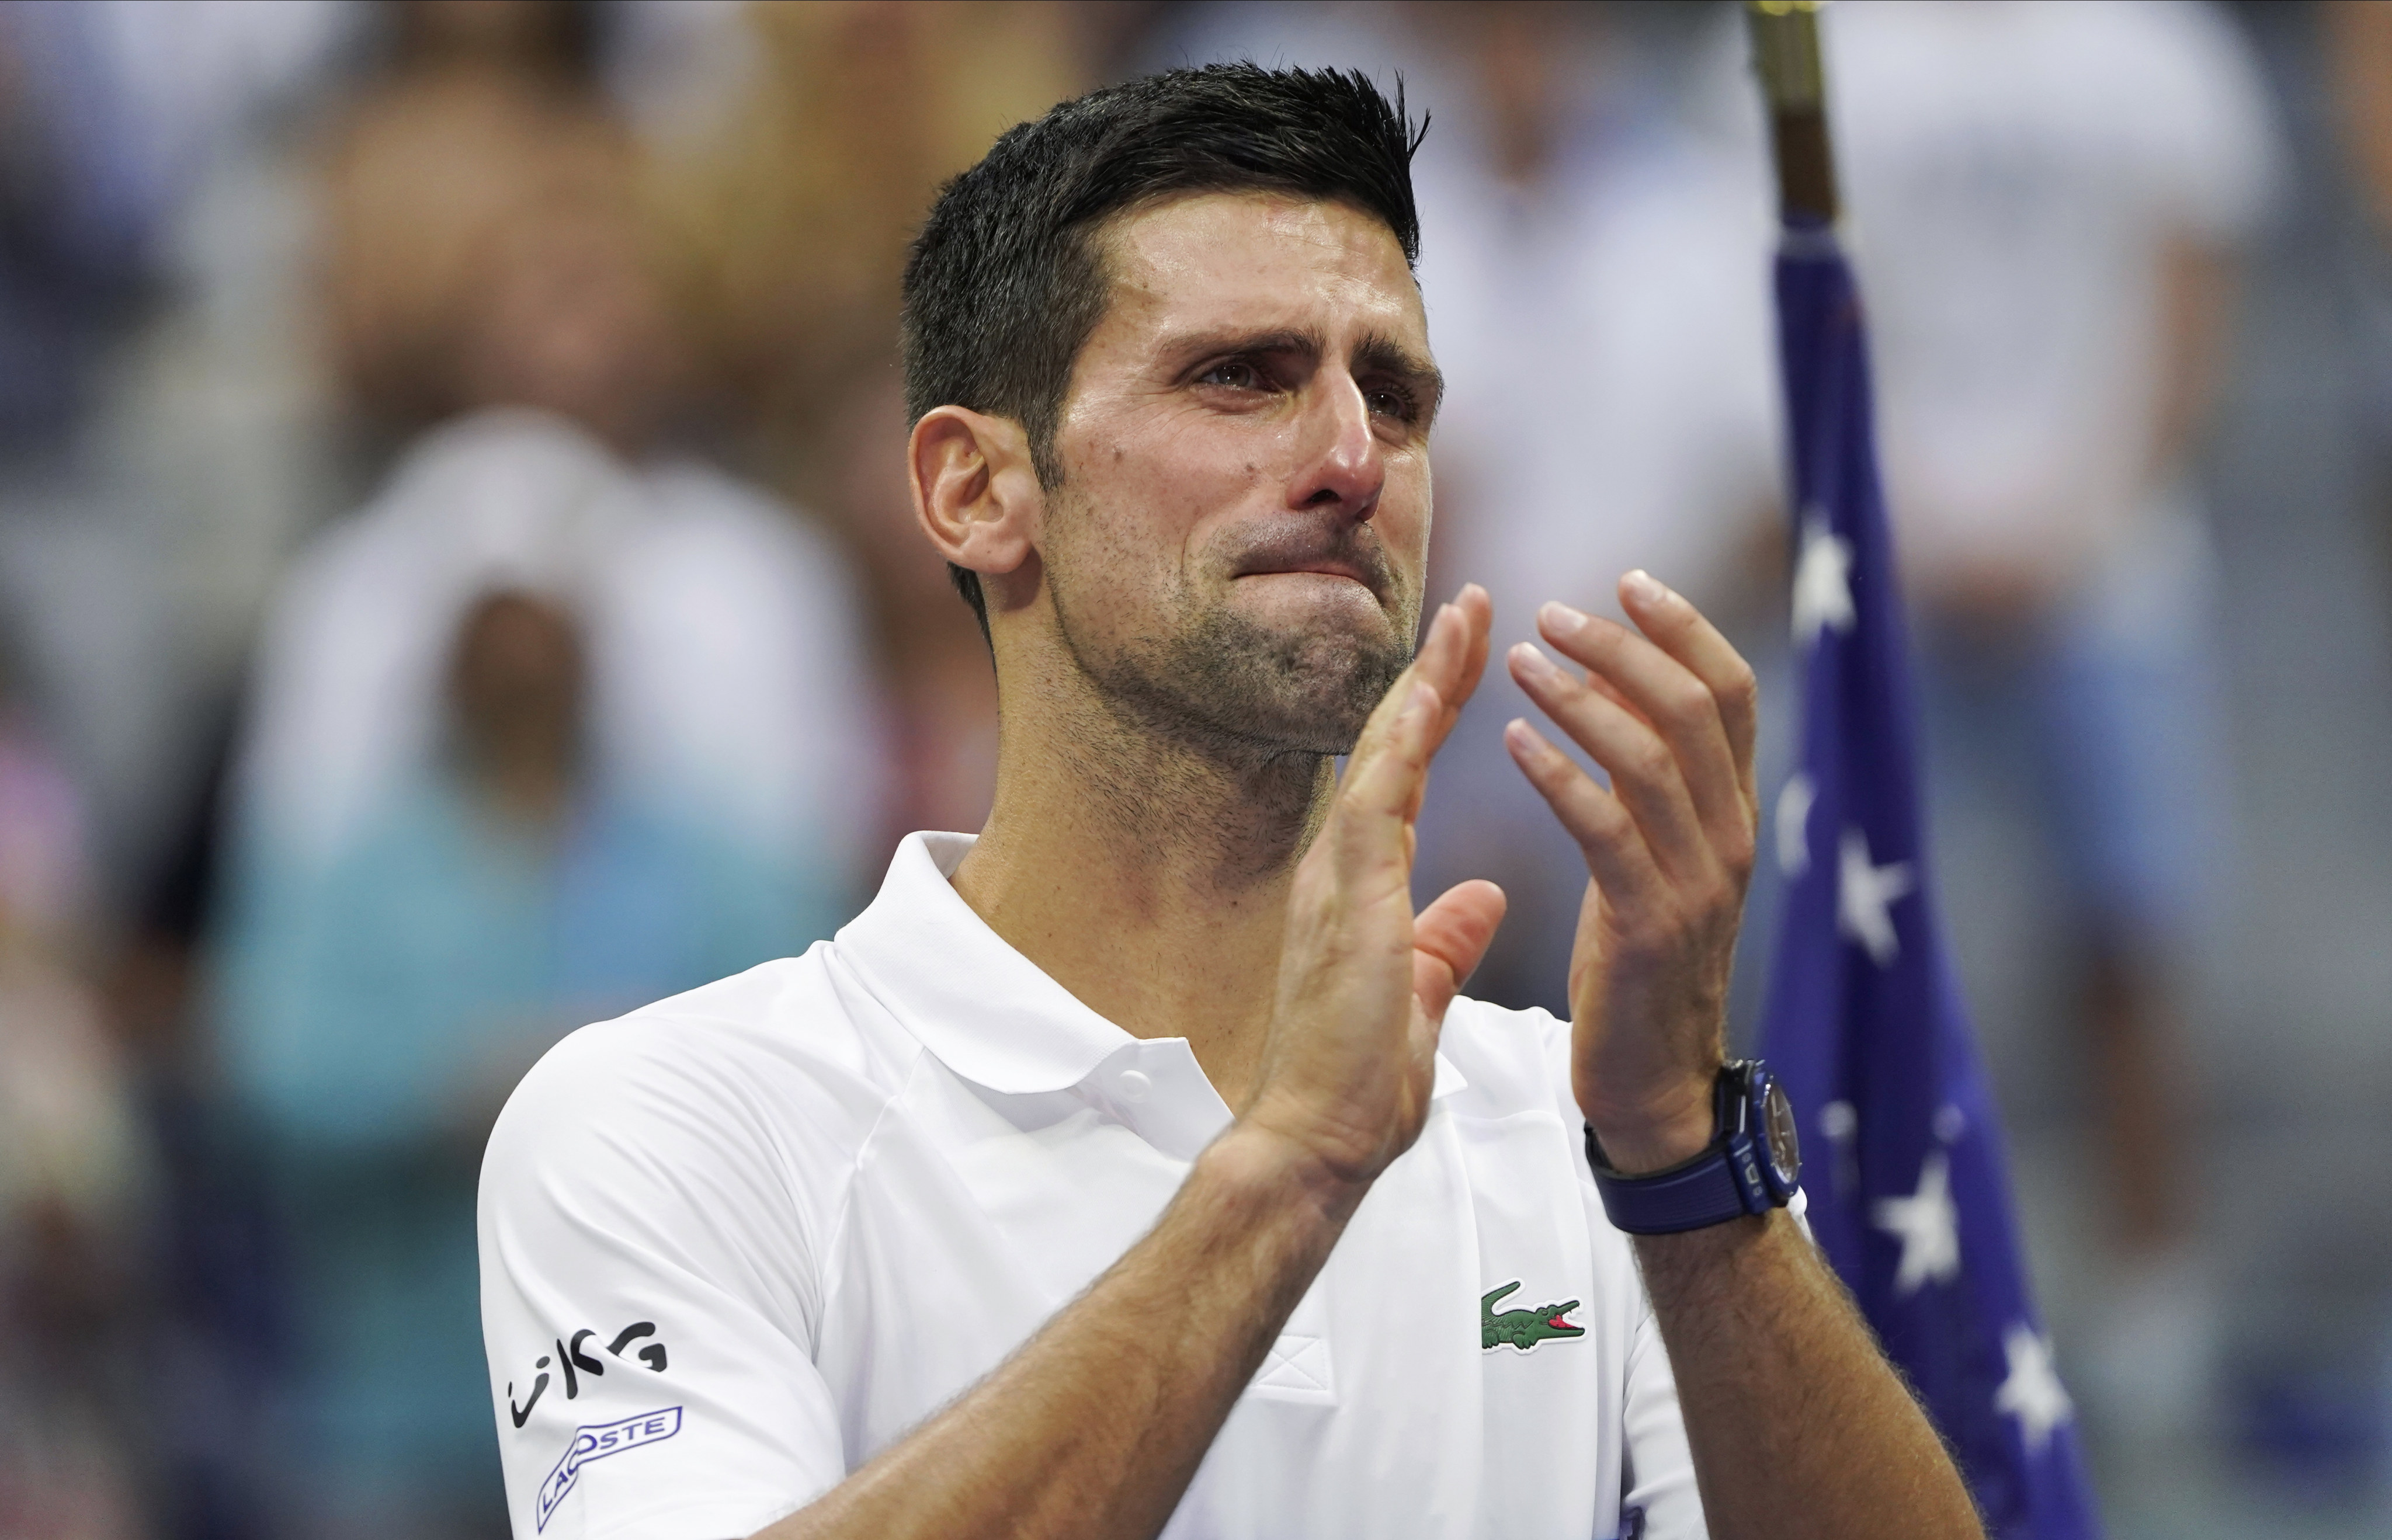 Novak Djokovic was unable to play in the 2022 US Open because he was not vaccinated against Covid-19. Photo: AP